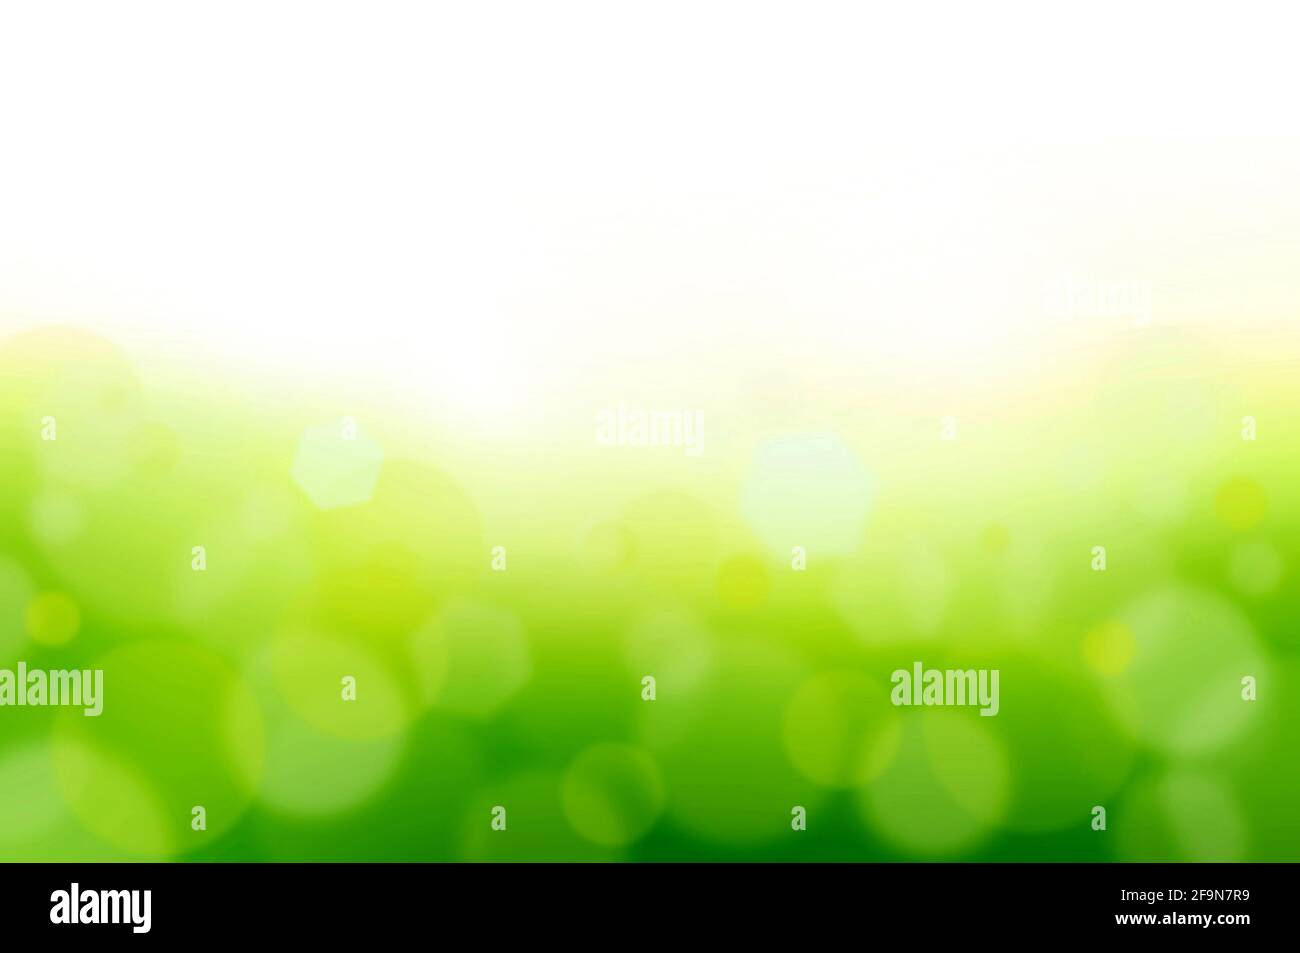 White & green abstract background with bokeh & lens flare effect Stock Photo